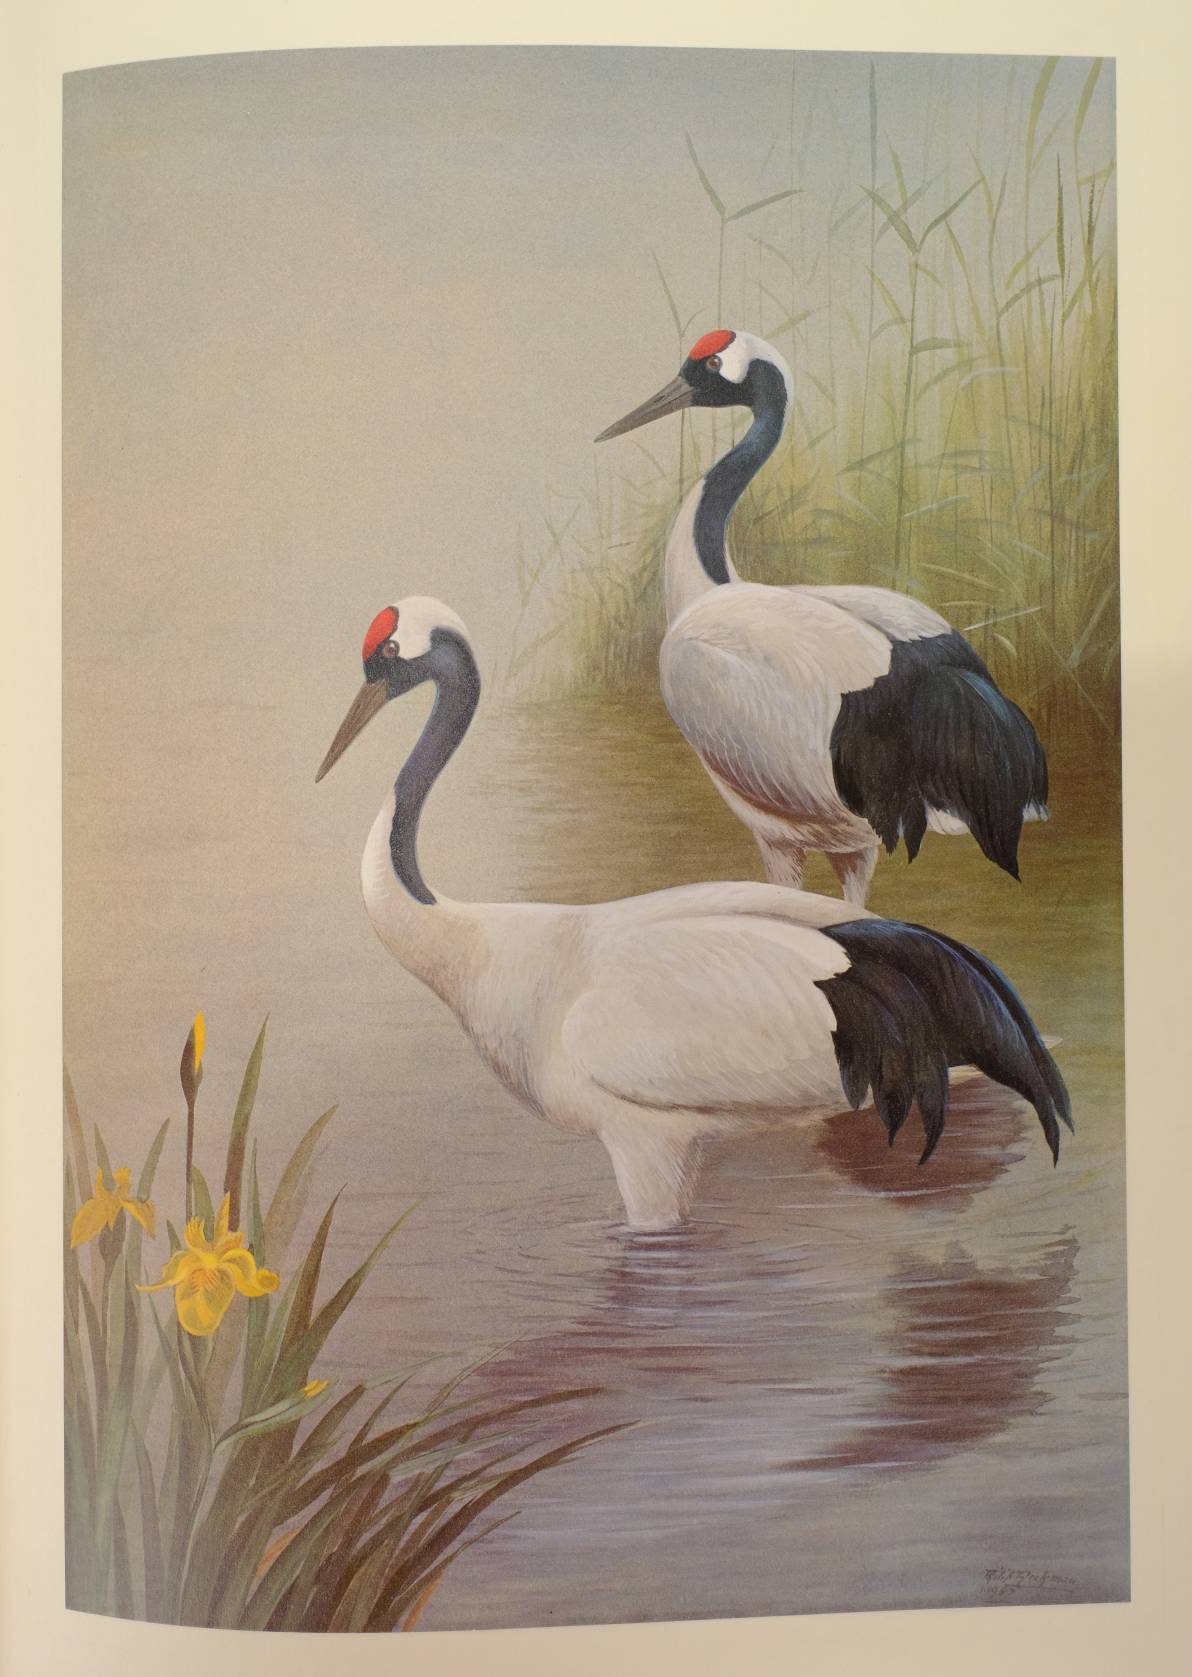 Rickman (Philip). A Selection of Bird Paintings and Sketches, Foreward by HRH The Duke of Edinburgh, - Image 5 of 6